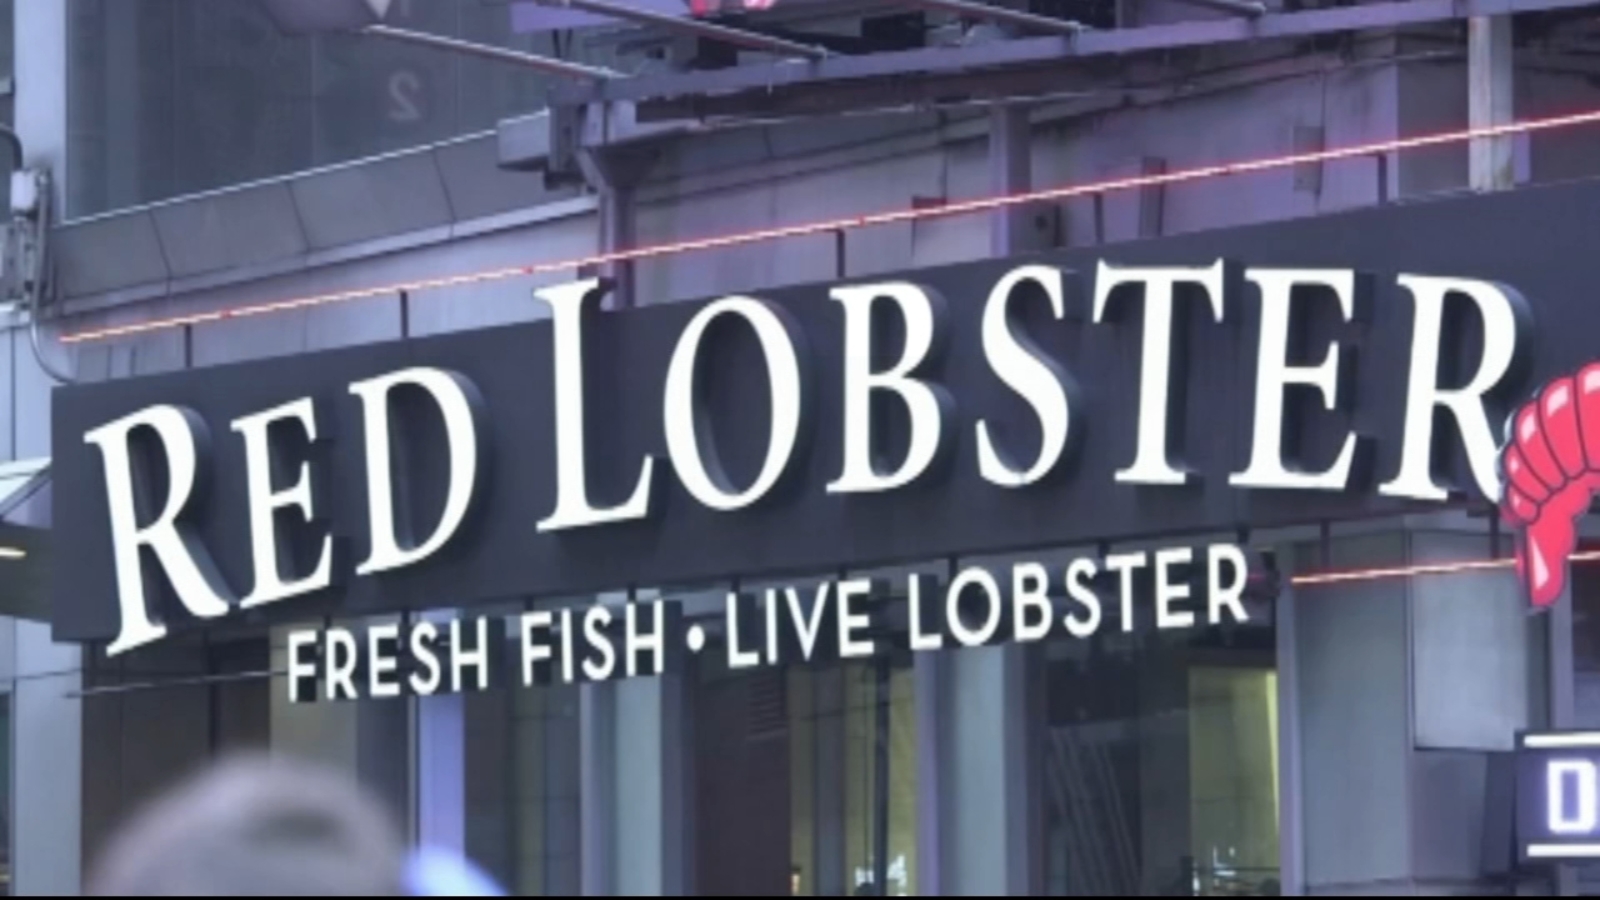 Red Lobster closings These are the 15 locations the restaurant chain